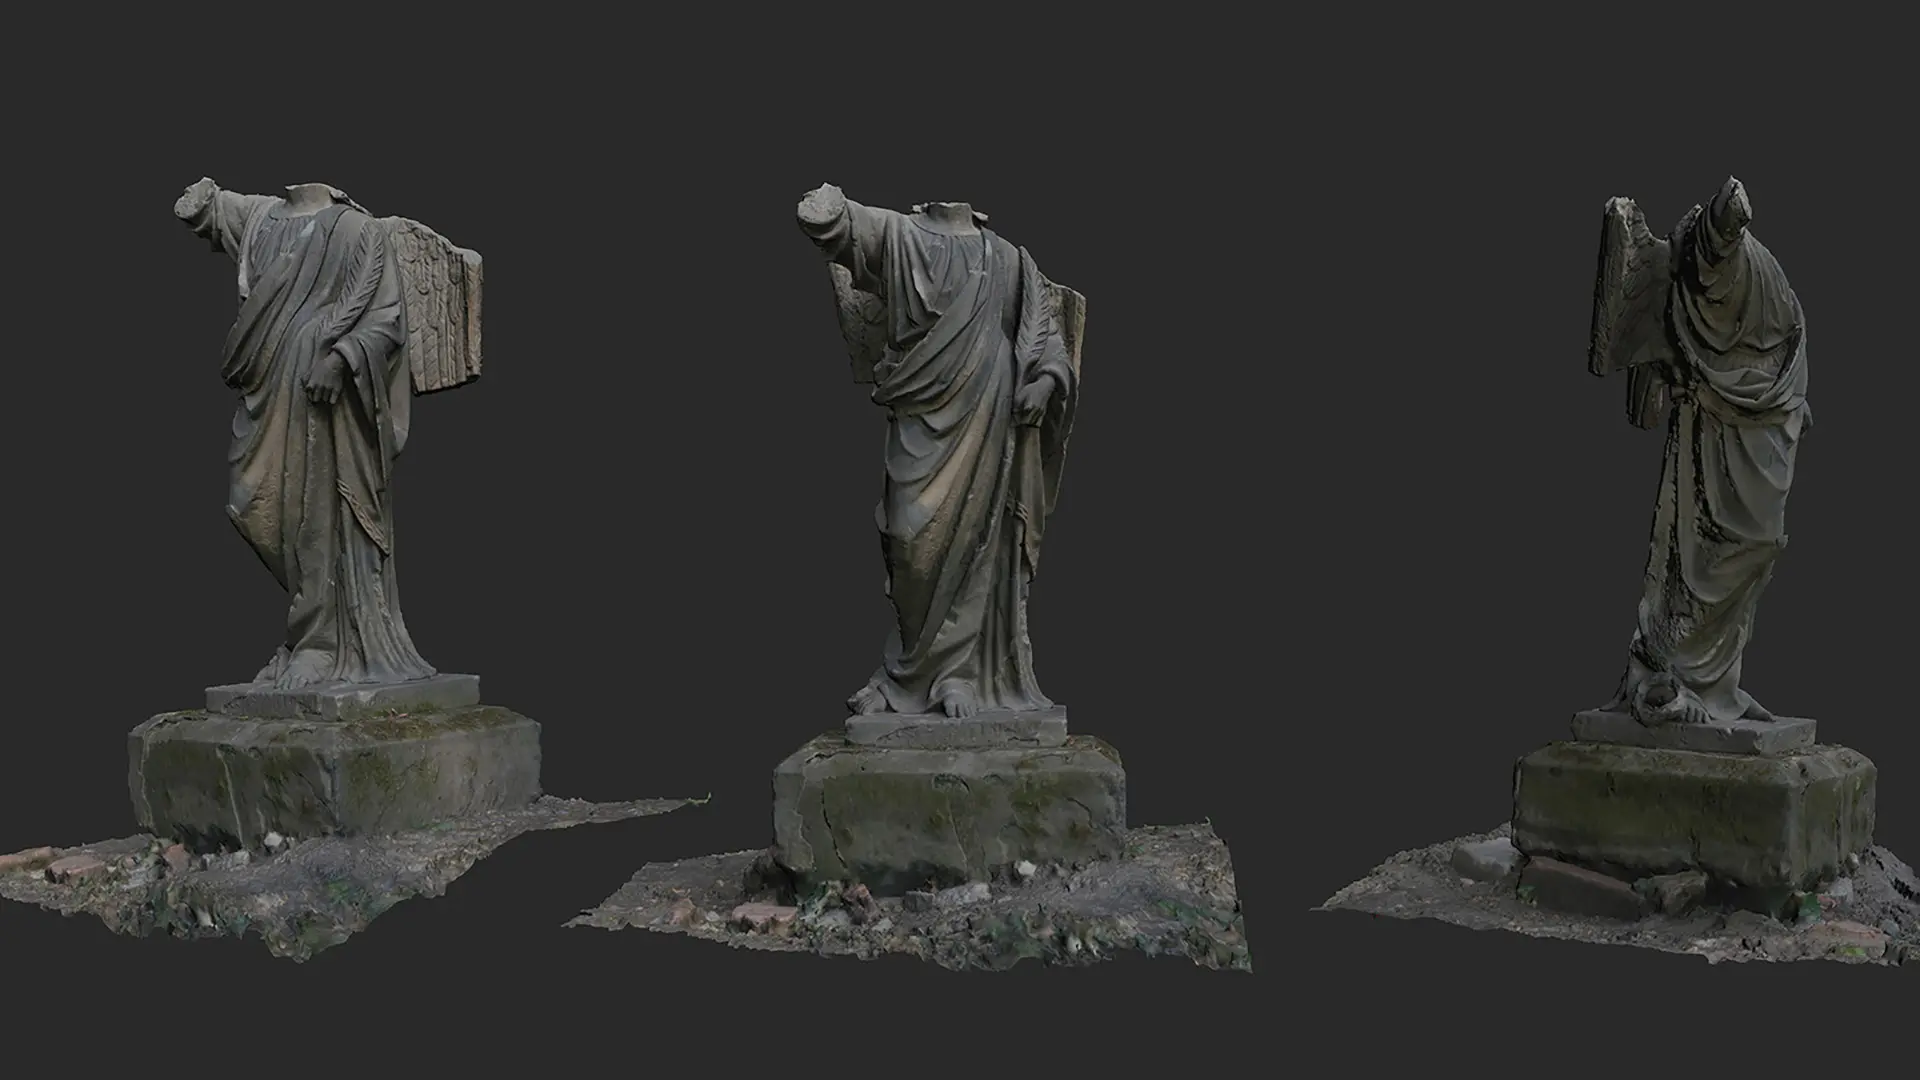 Photogrammetry of objects during my travels through Eastern Europe